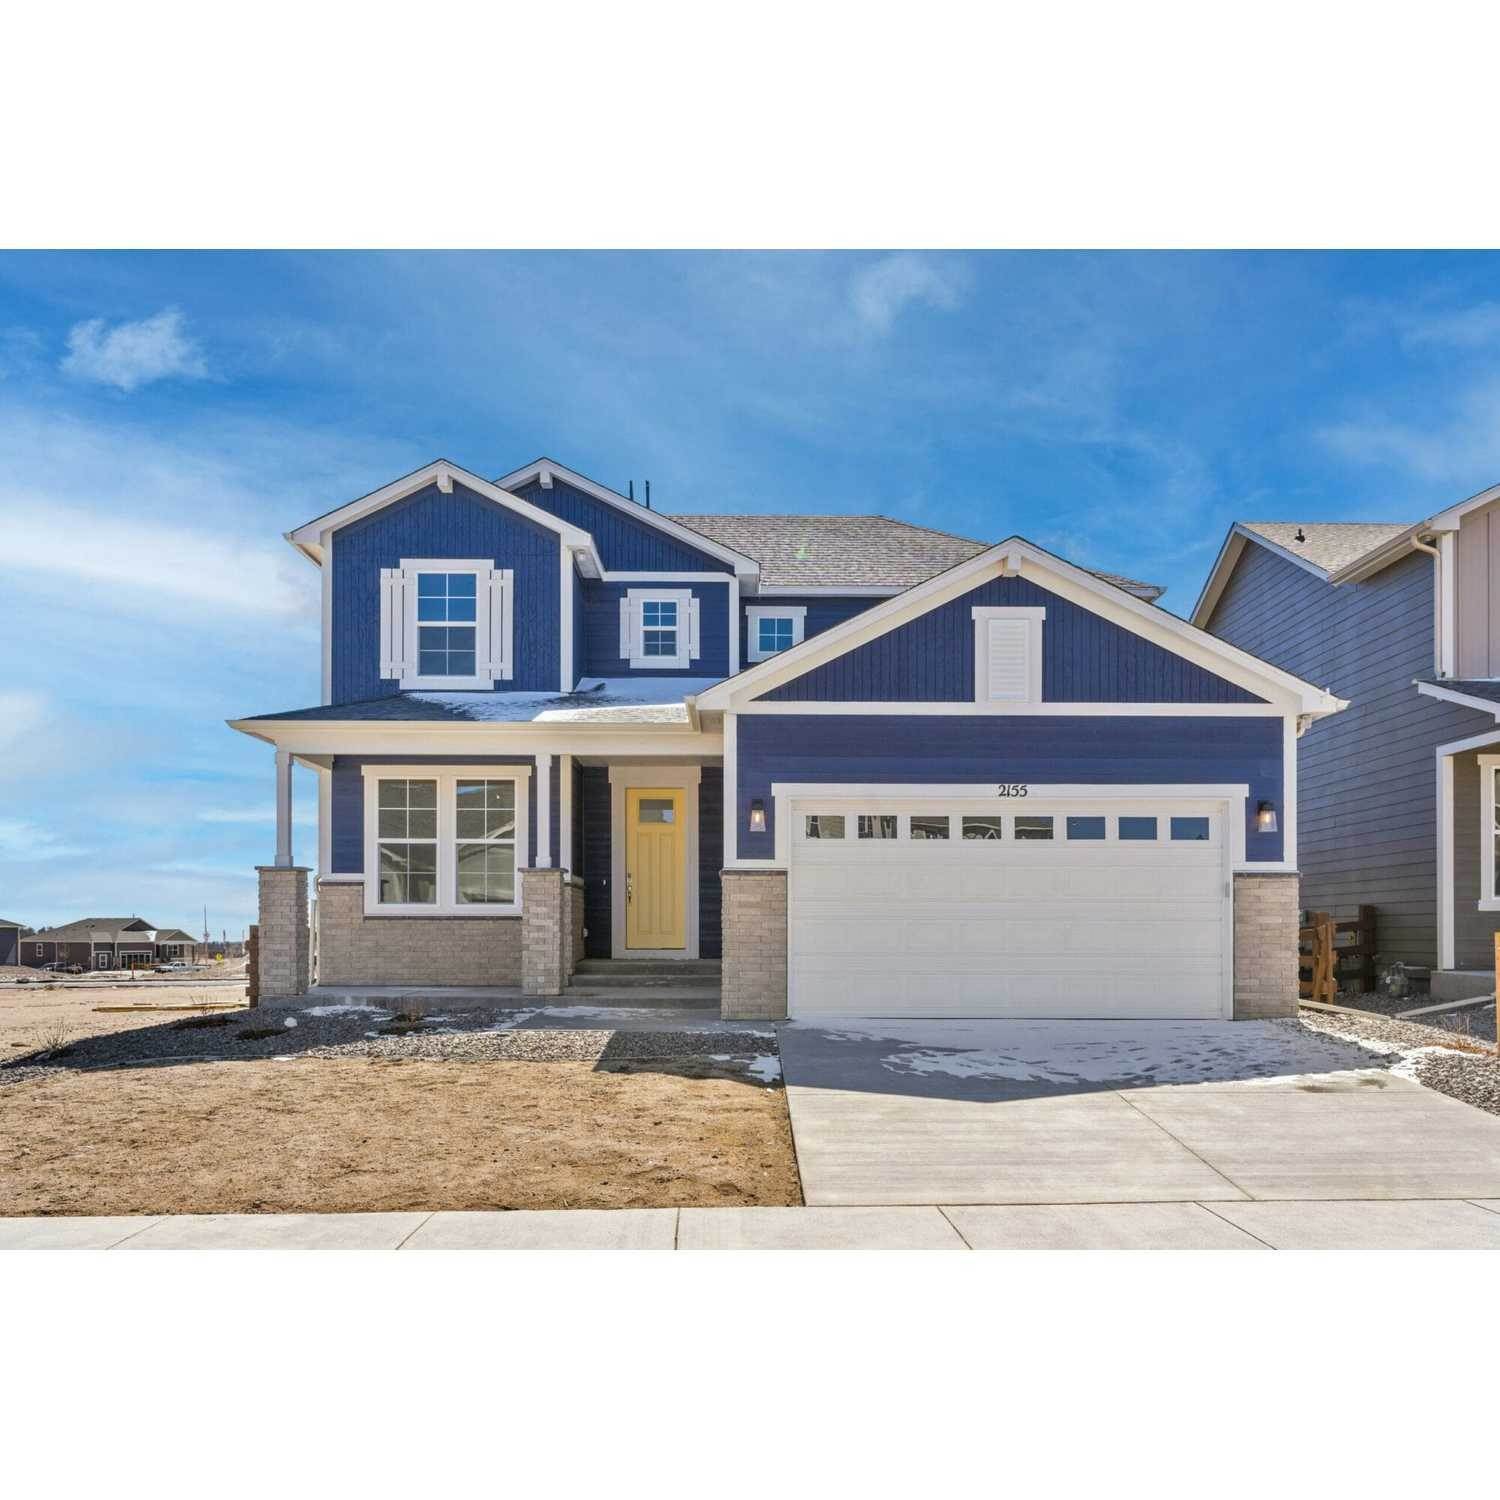 15665 Native Willow Dr, Monument, CO 80132에 Willow Springs Ranch - Falcon Series 건물